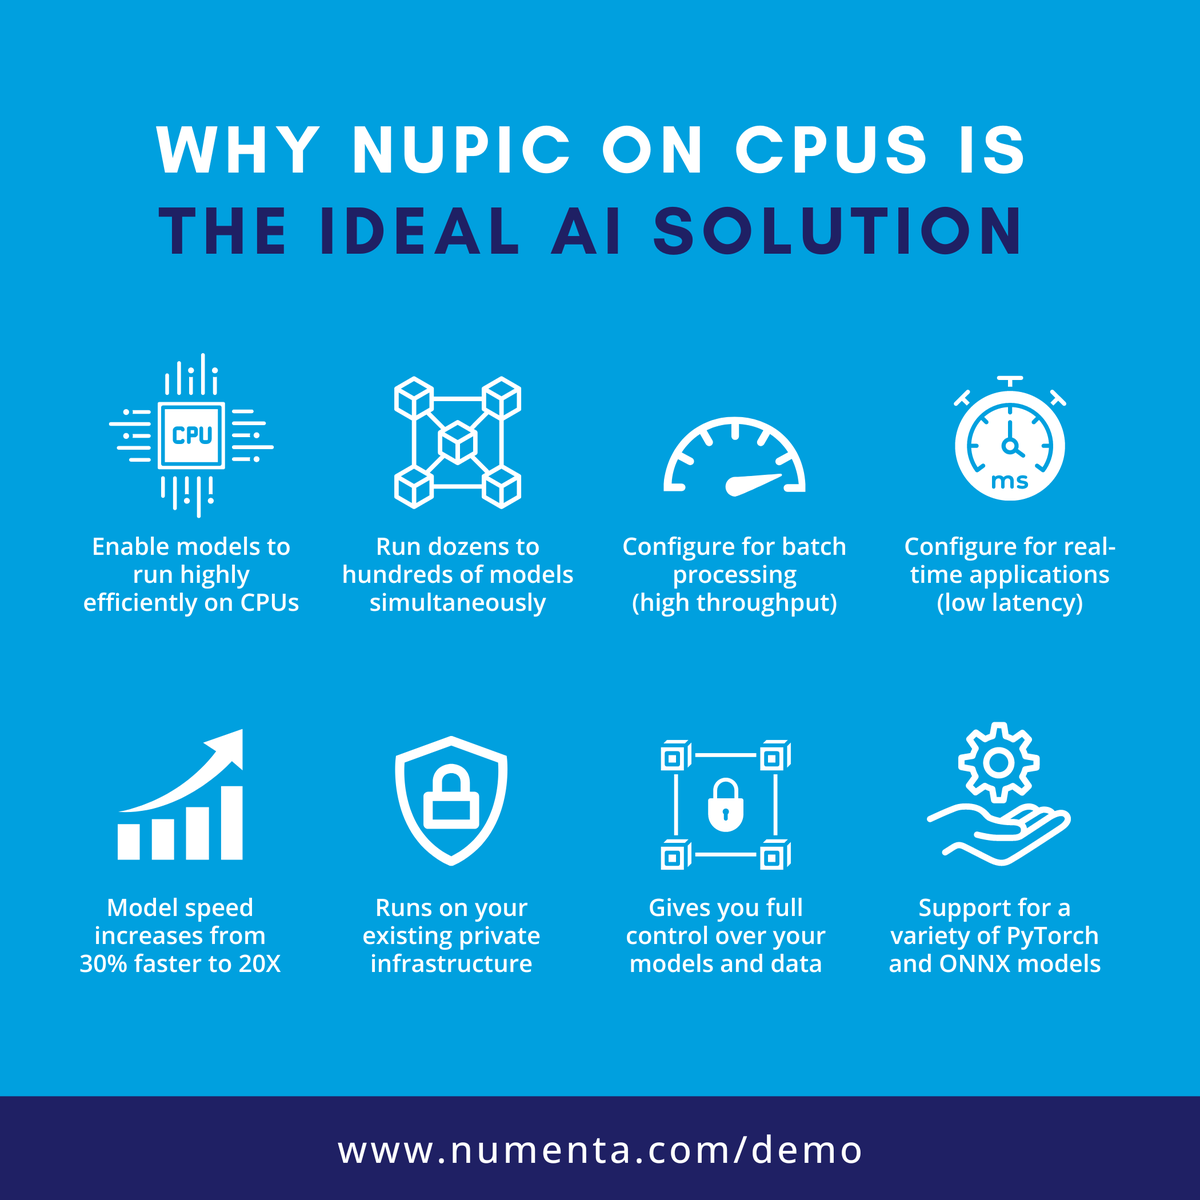 When it comes to your AI applications, if you’re not running on CPUs, you’re already running behind.

Our AI platform NuPIC is optimized to deploy large AI models on #CPUs, enabling you to run powerful #AI applications - no GPUs required!

Request a demo: numenta.com/demo